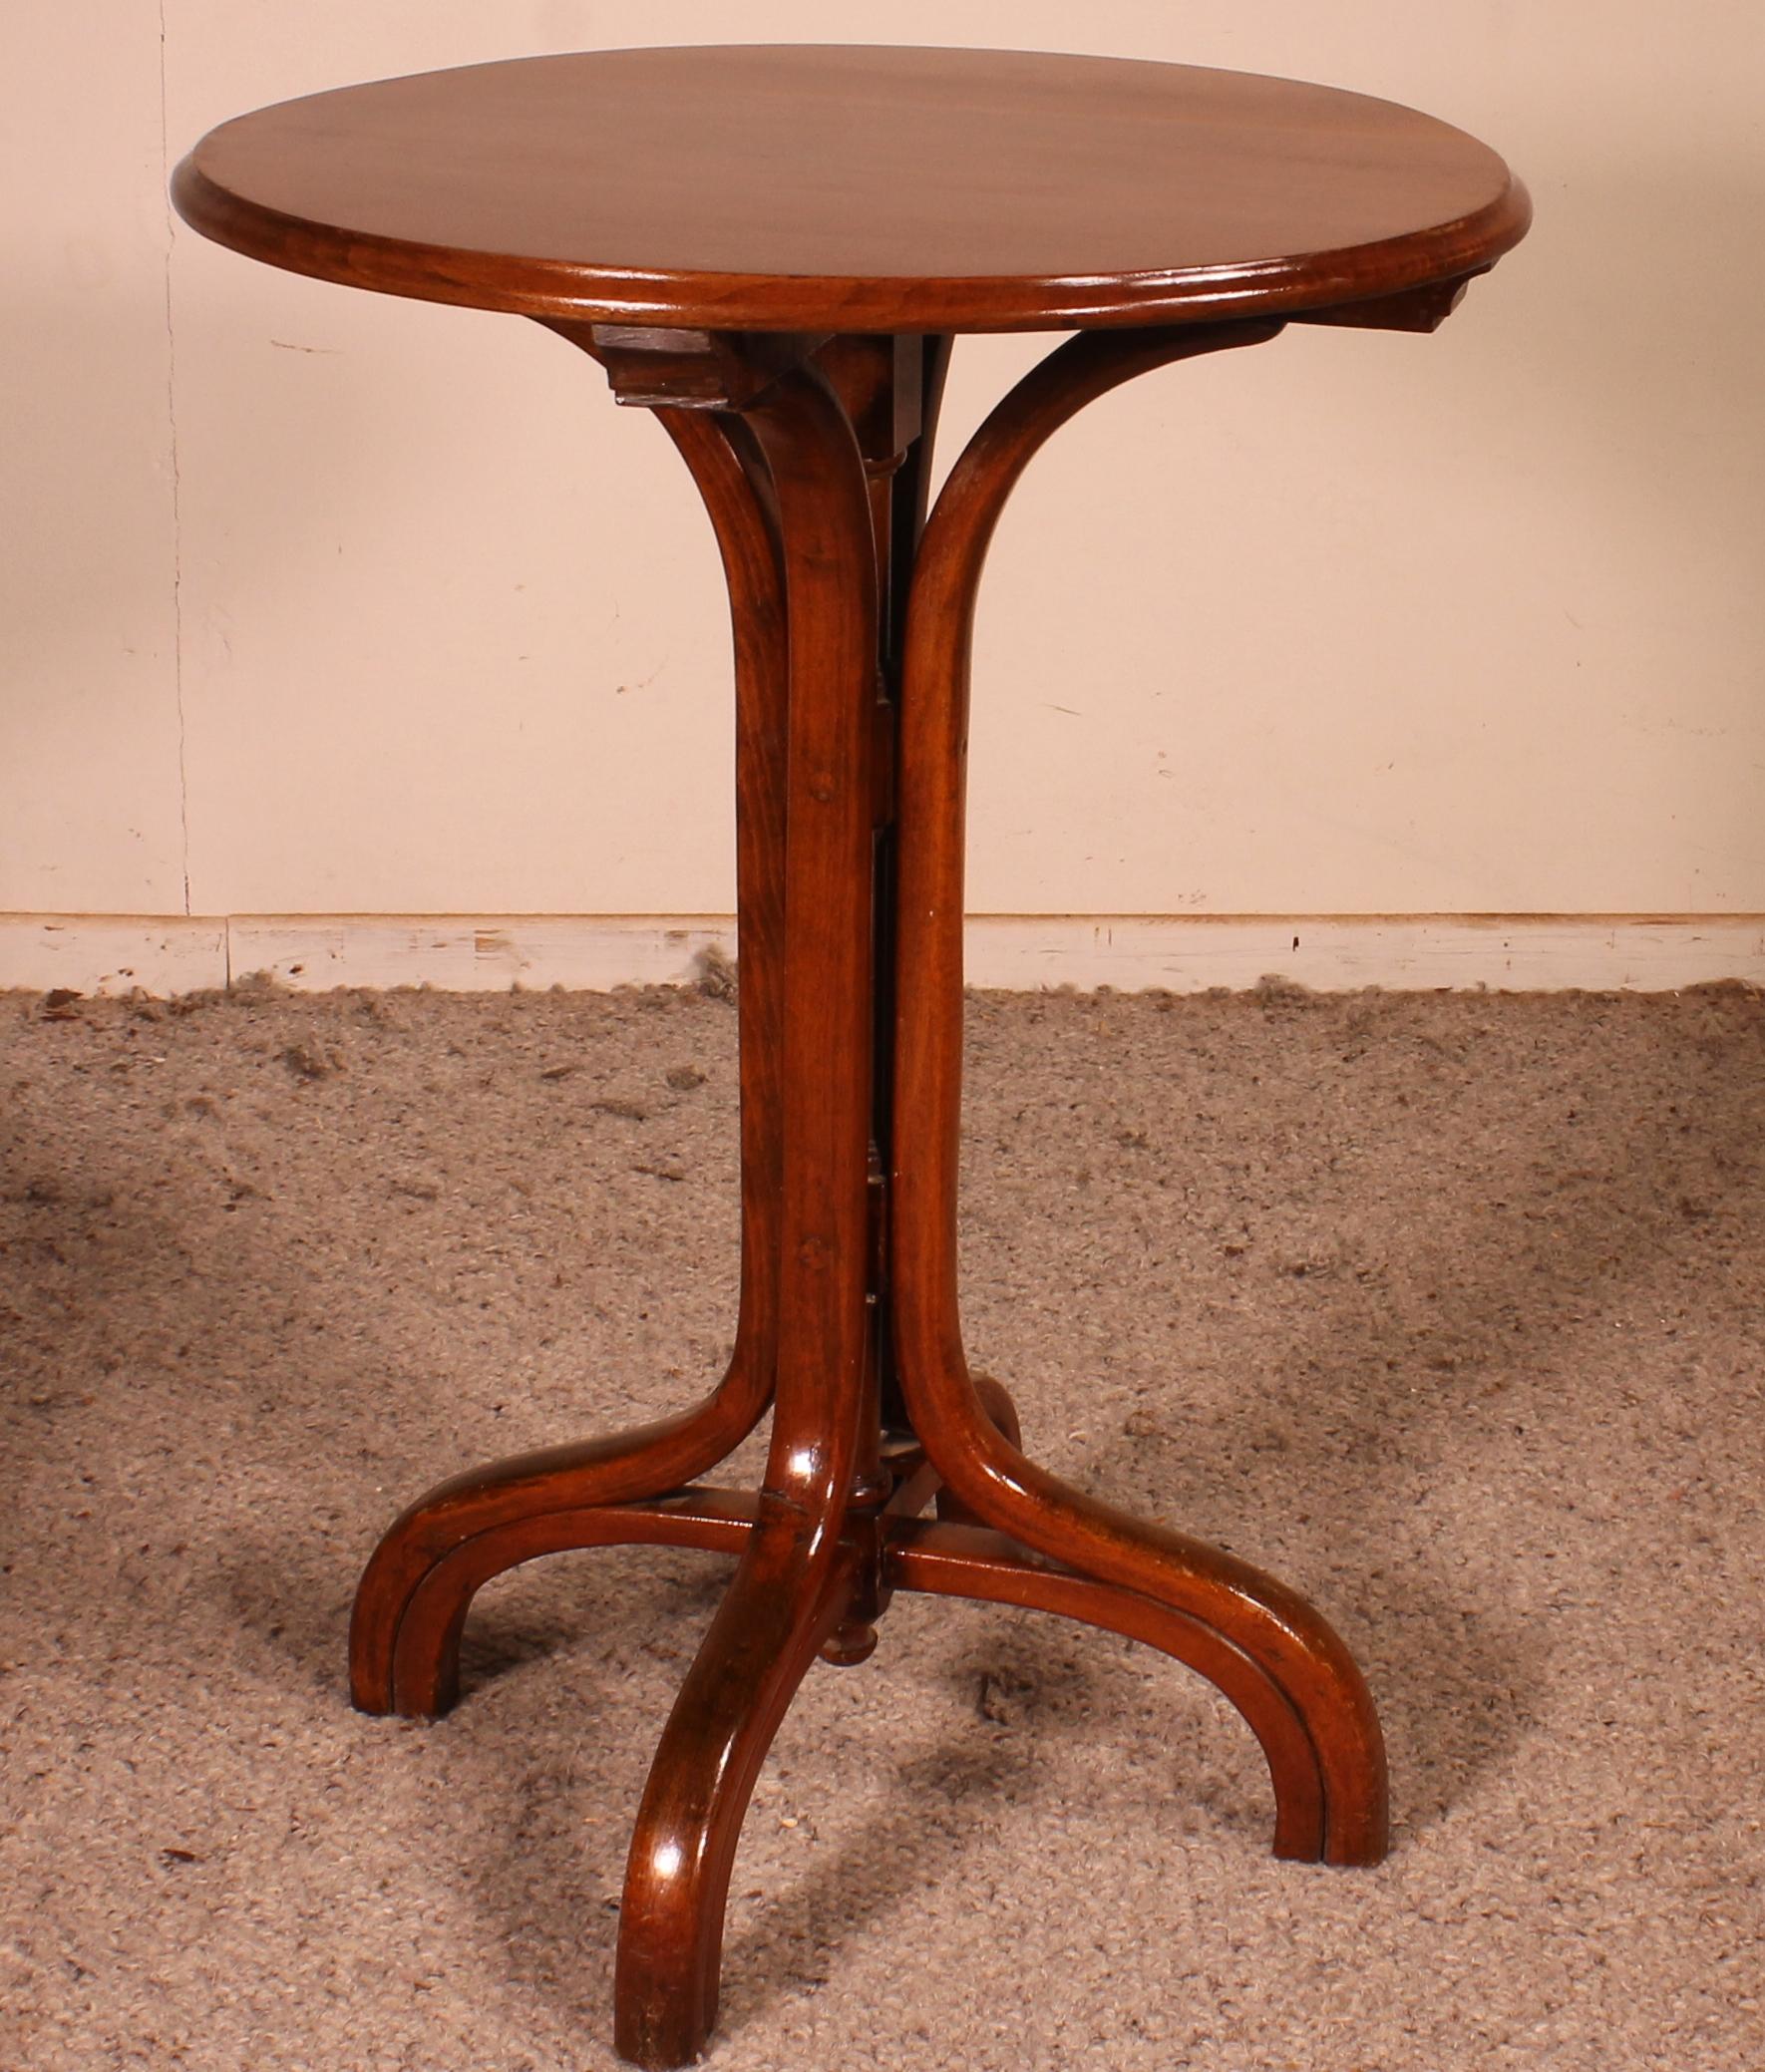 Small art nouveau pedestal table from the beginning of the 20th century in beech wood
in superb condition and very beautiful patina.